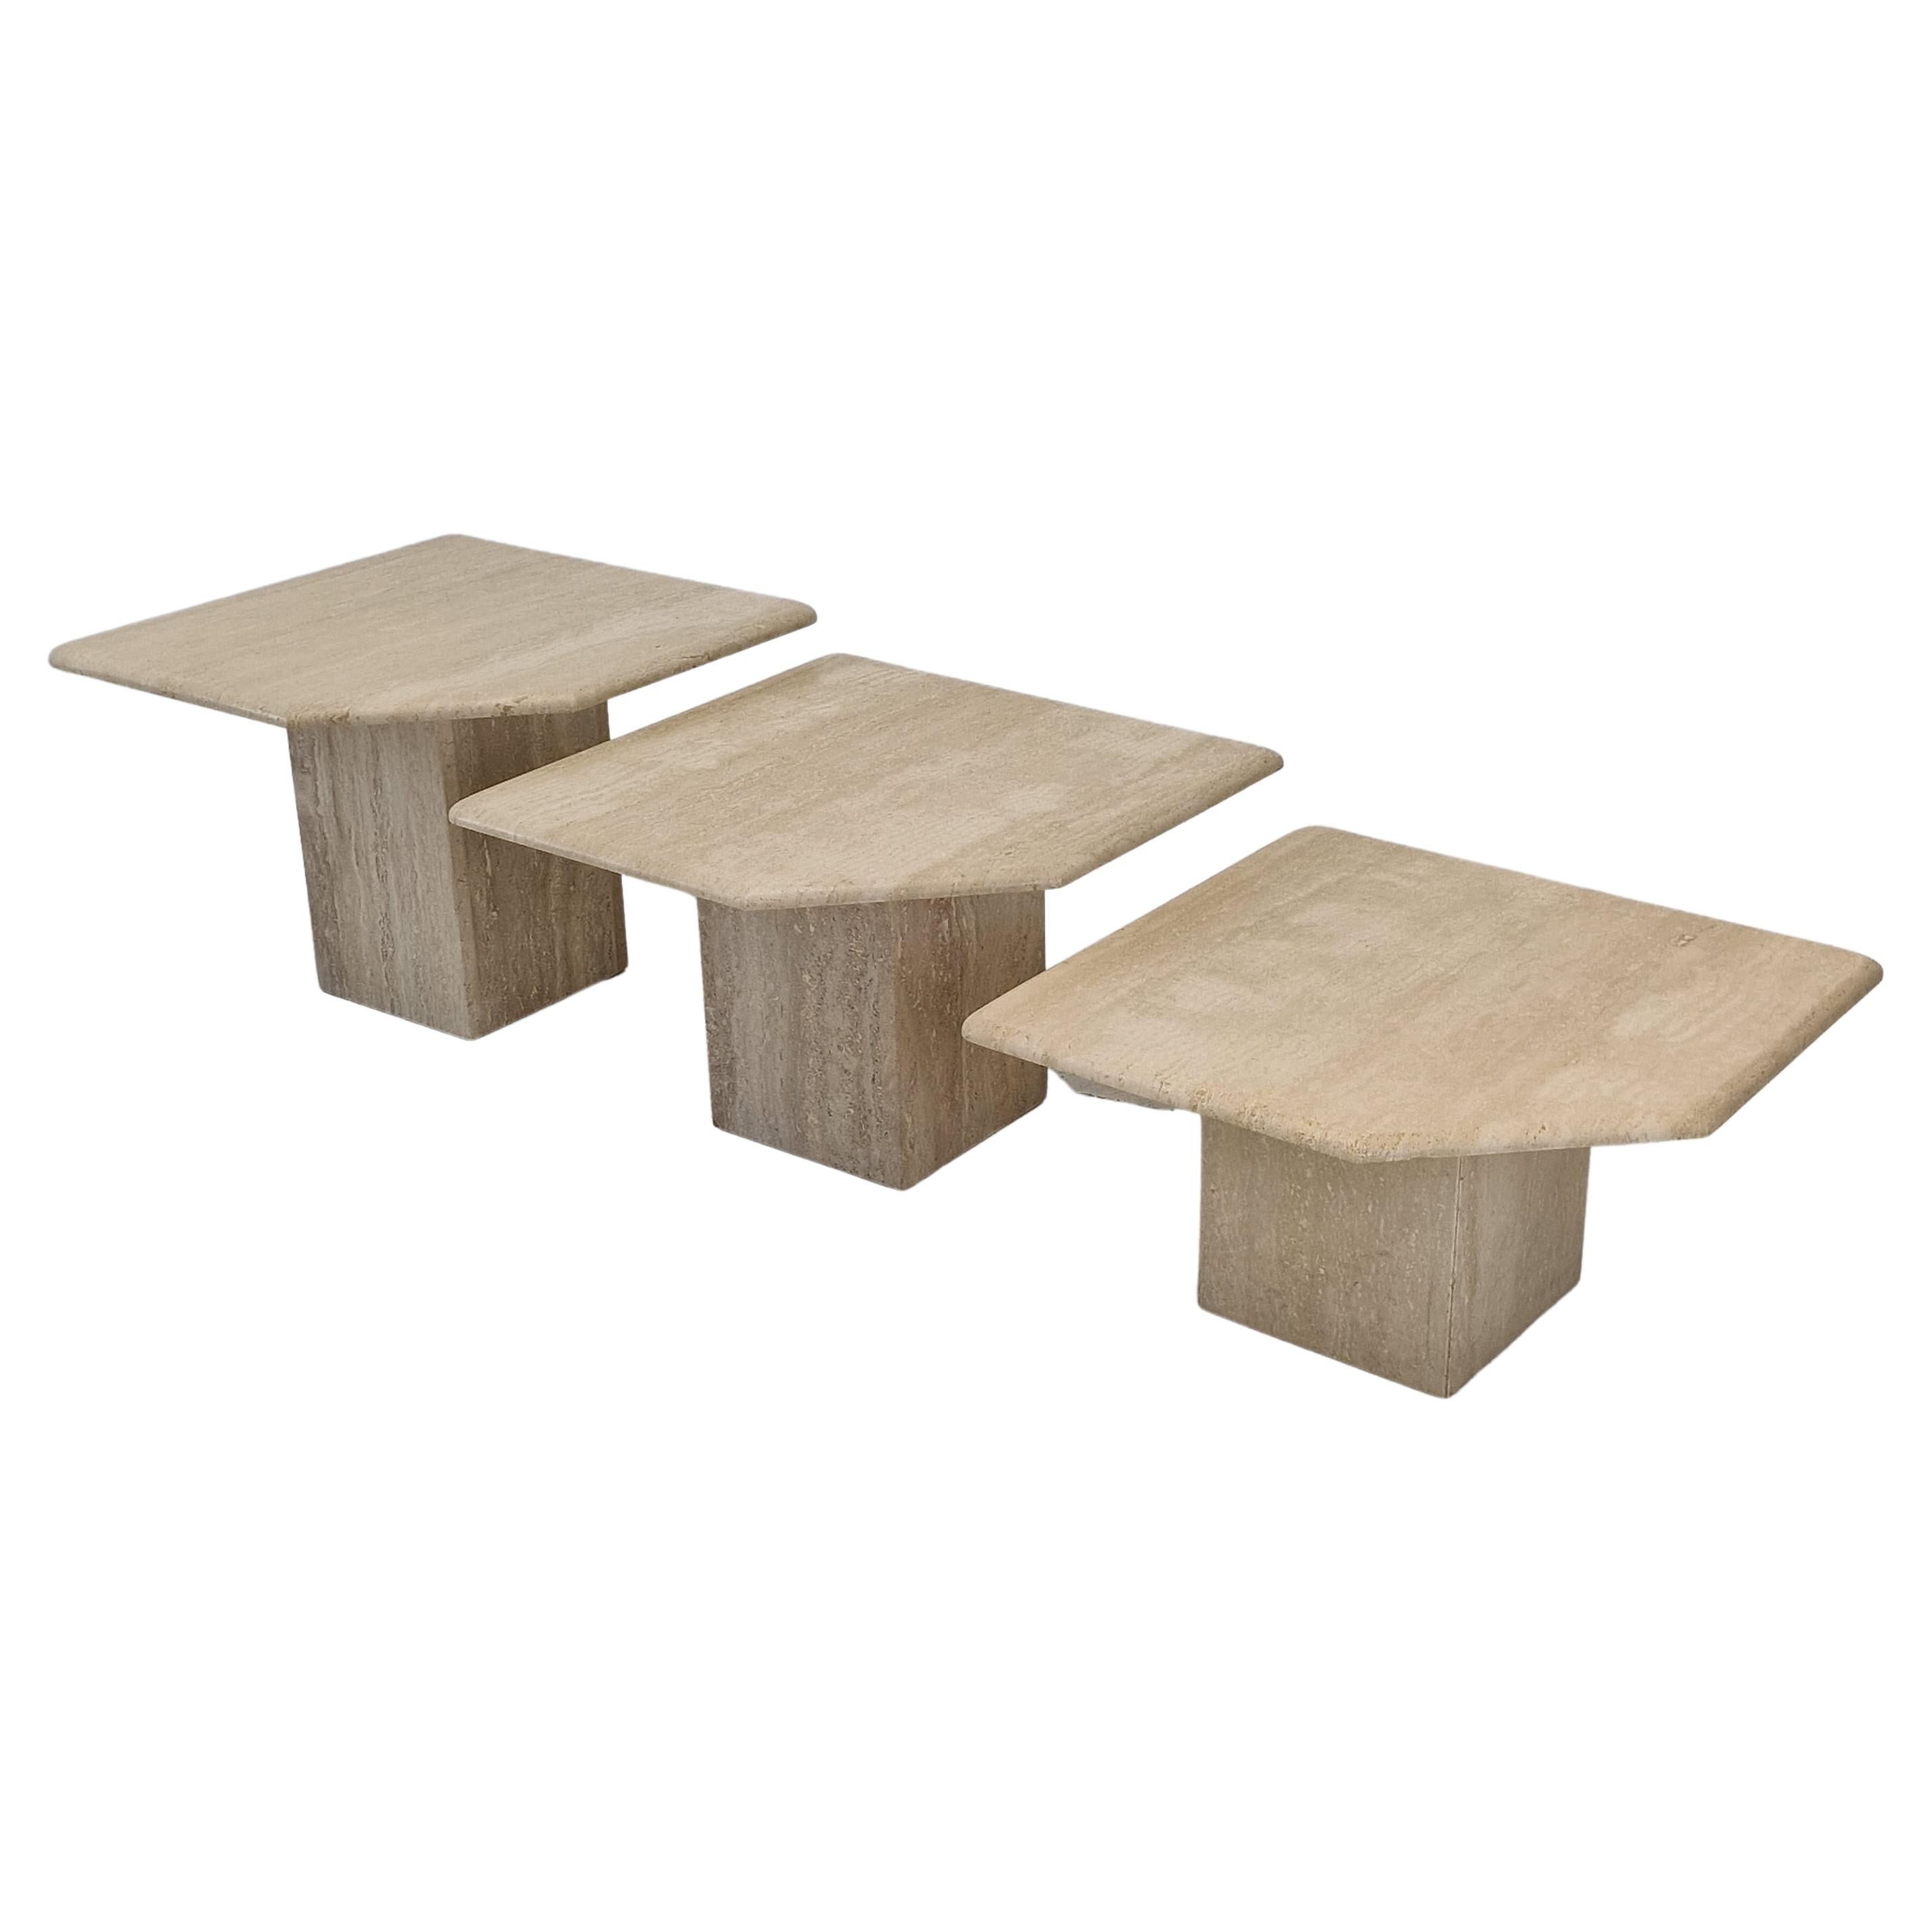 Set of 3 Italian Travertine Coffee or Side Tables, 1980s For Sale